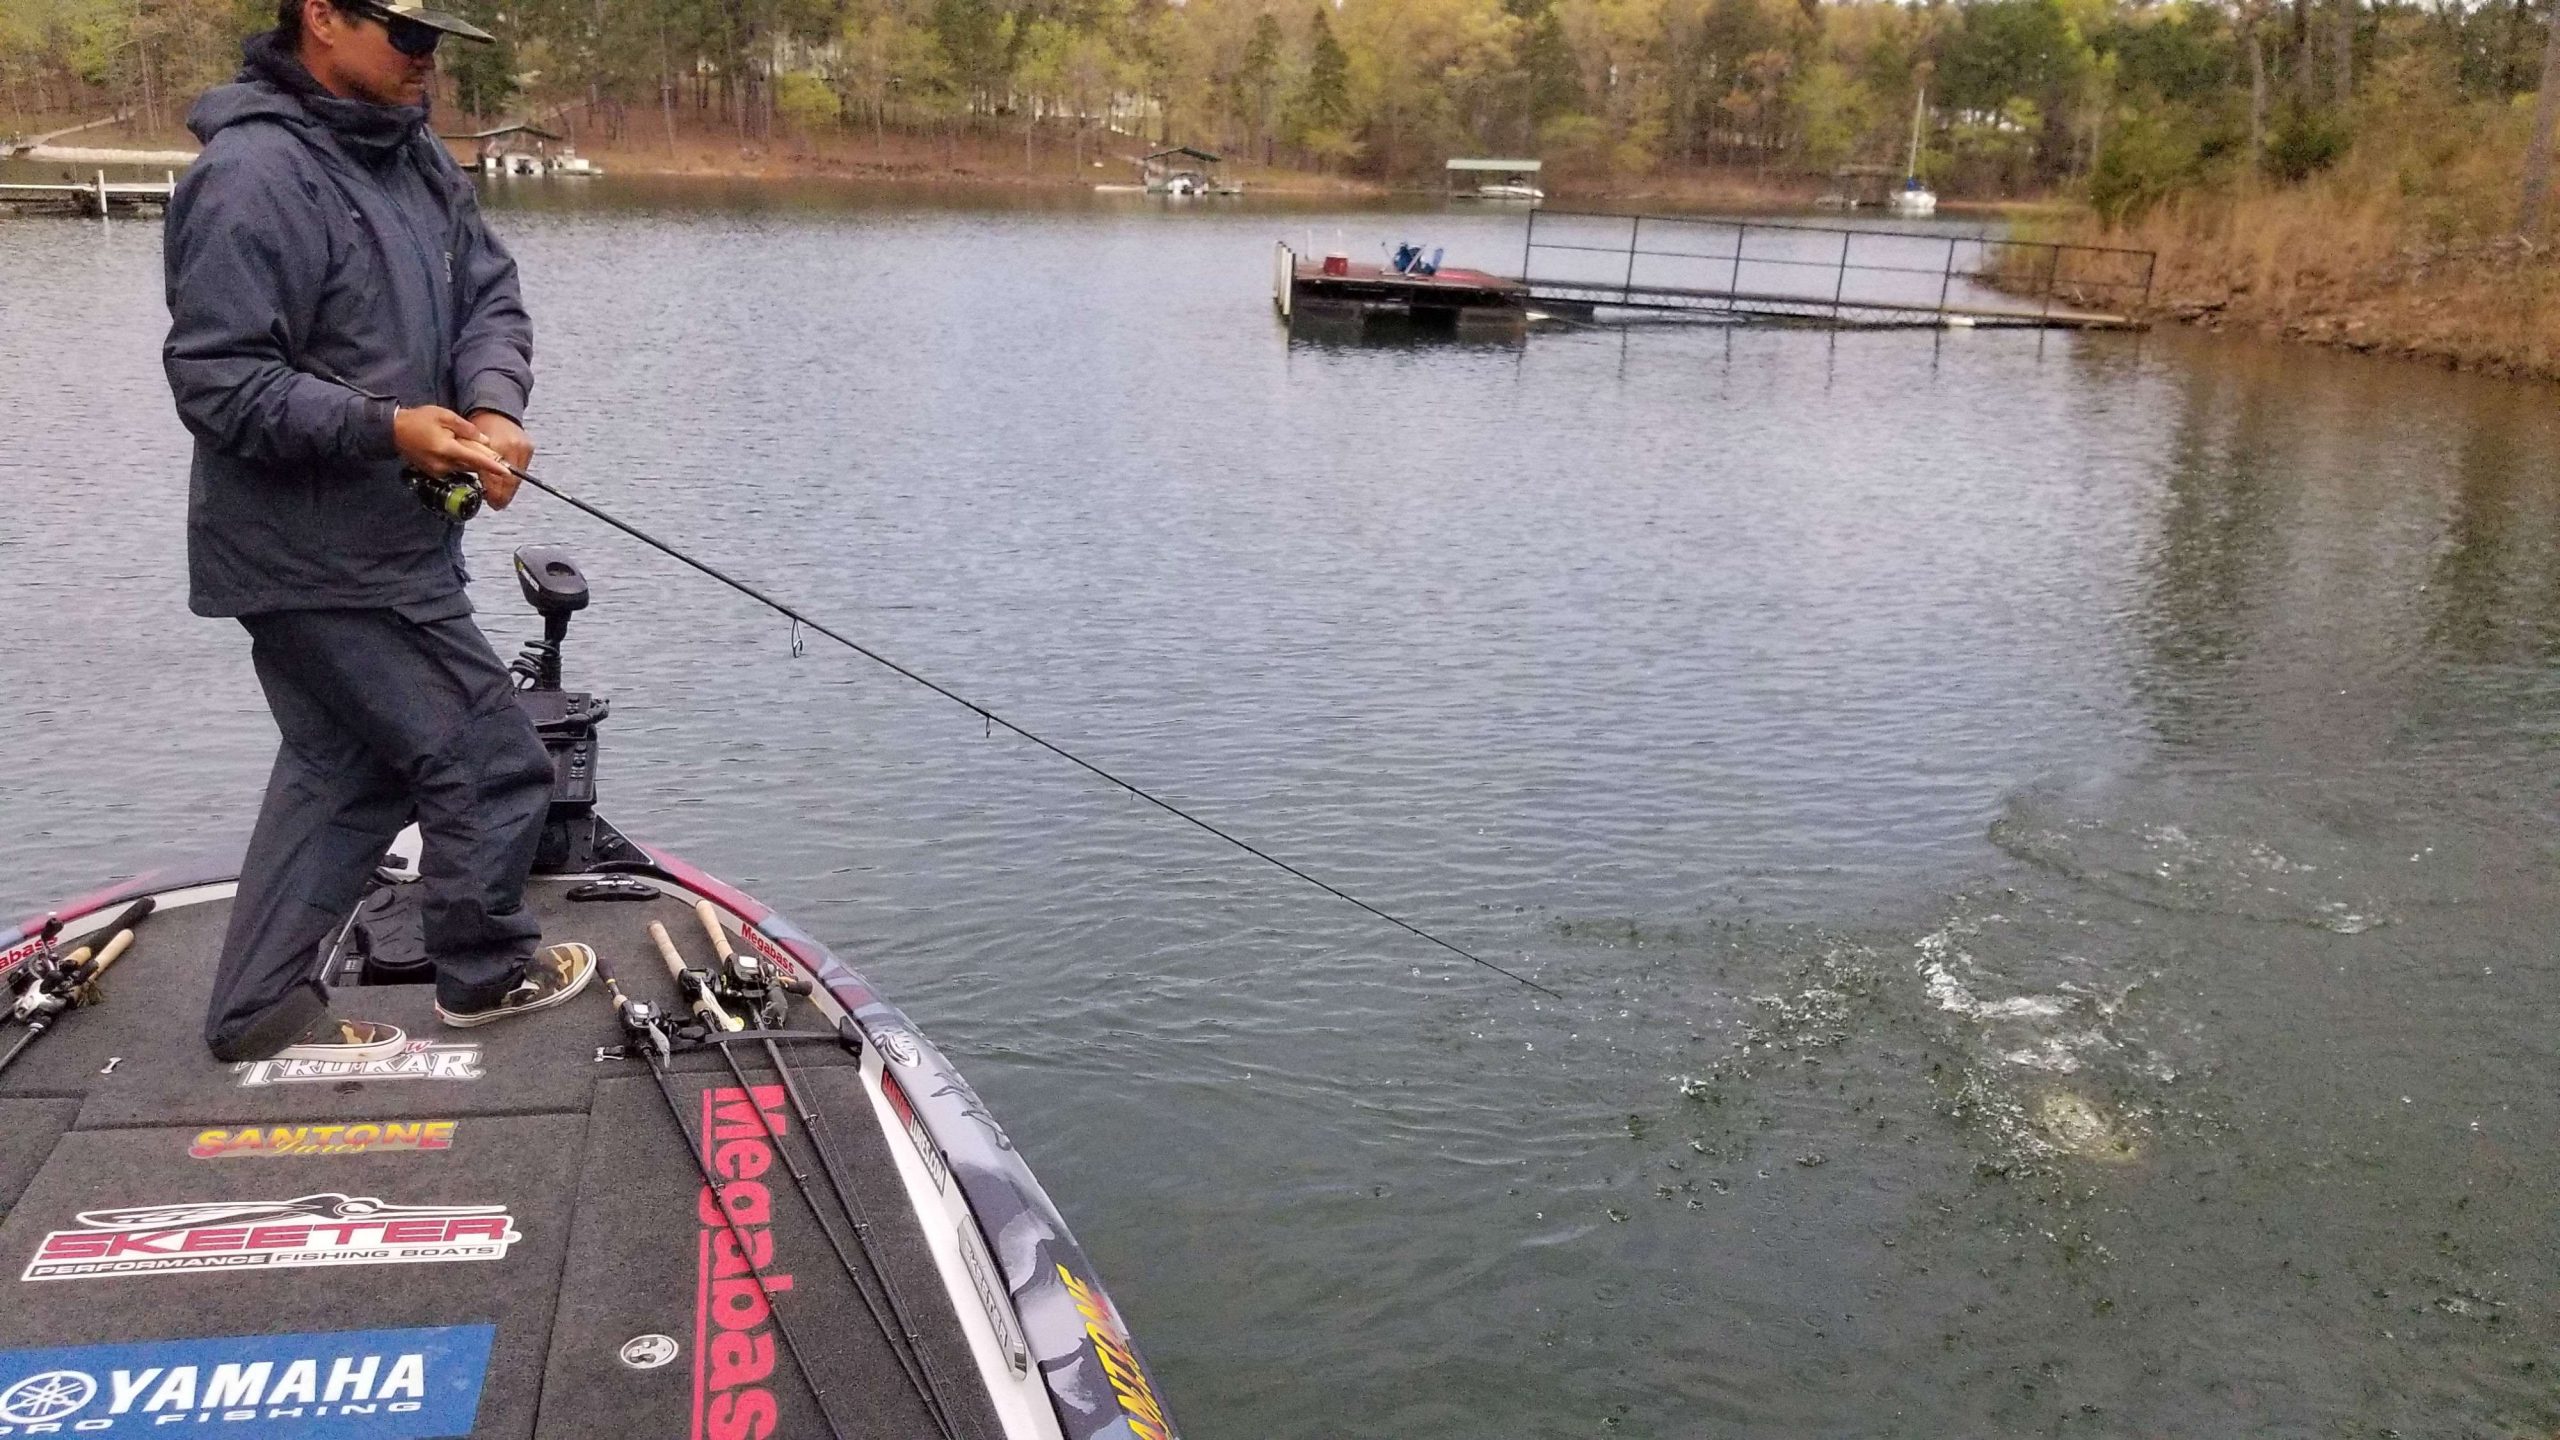 Now the bite is starting to turn on. After losing one halfway to the boat Chris Zaldain was able to land two back to back: one greenie and one spot. 